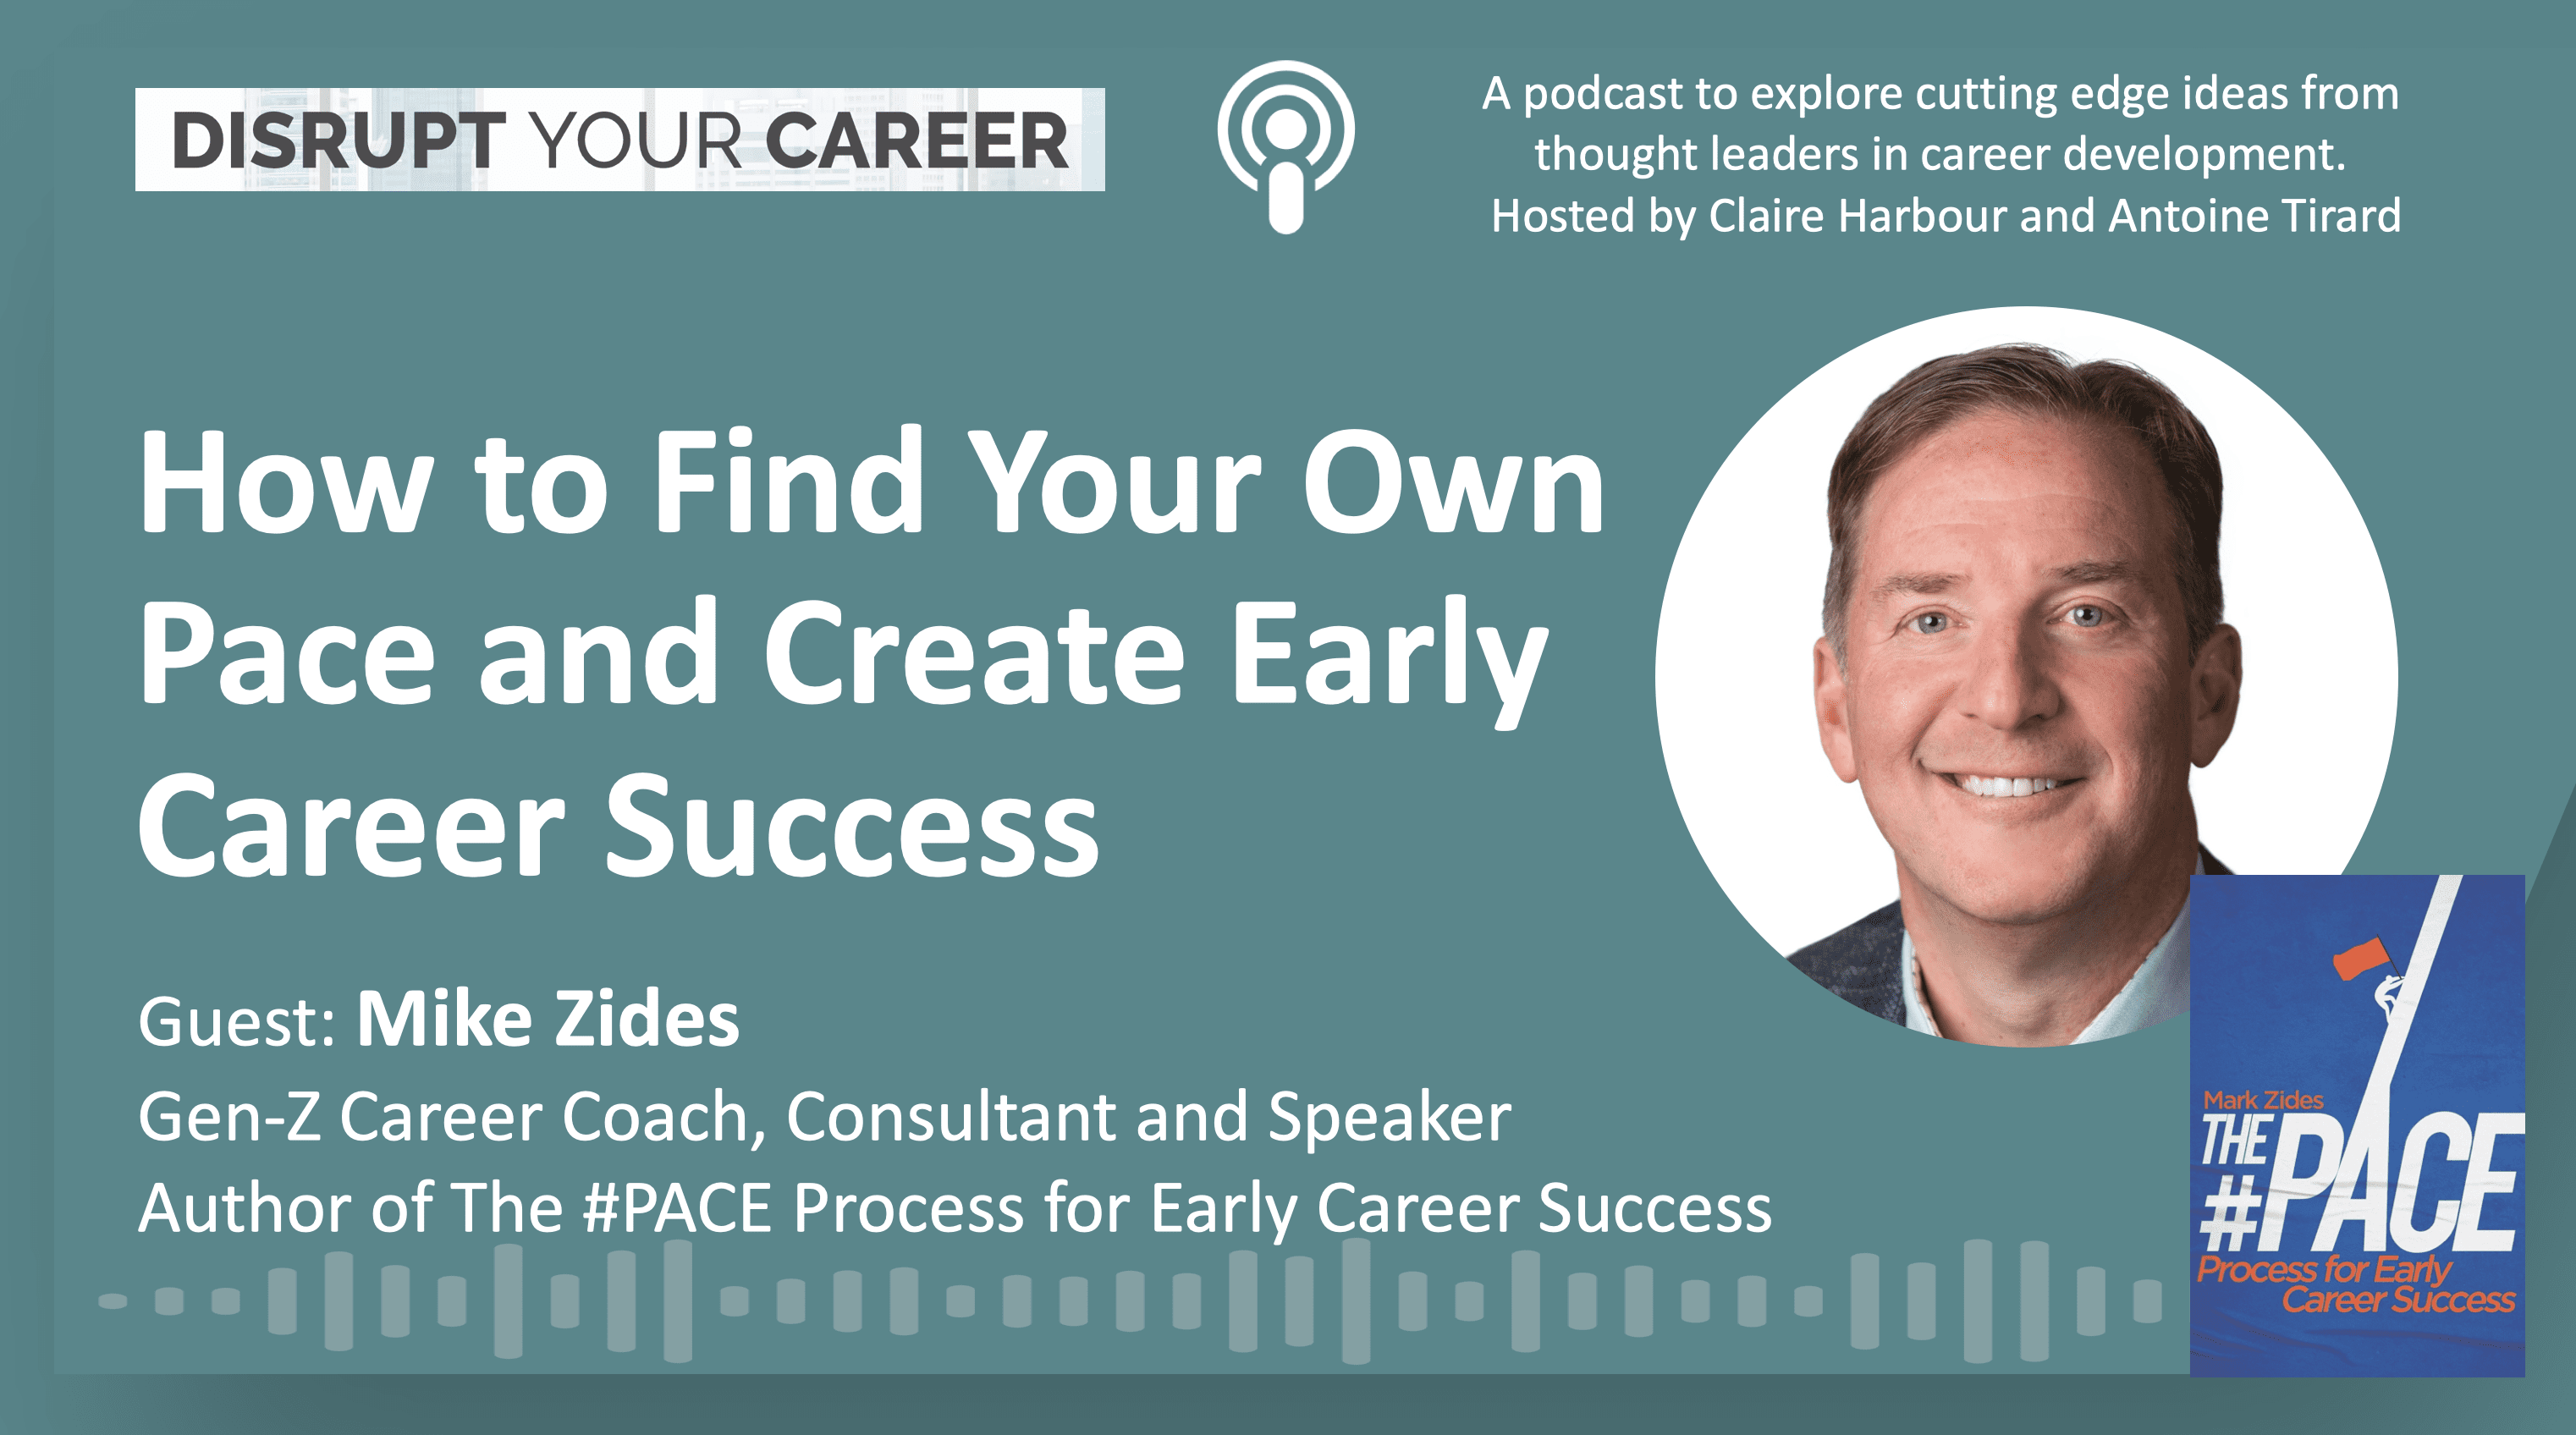 How to Find Your Own Pace and Create Early Career Success